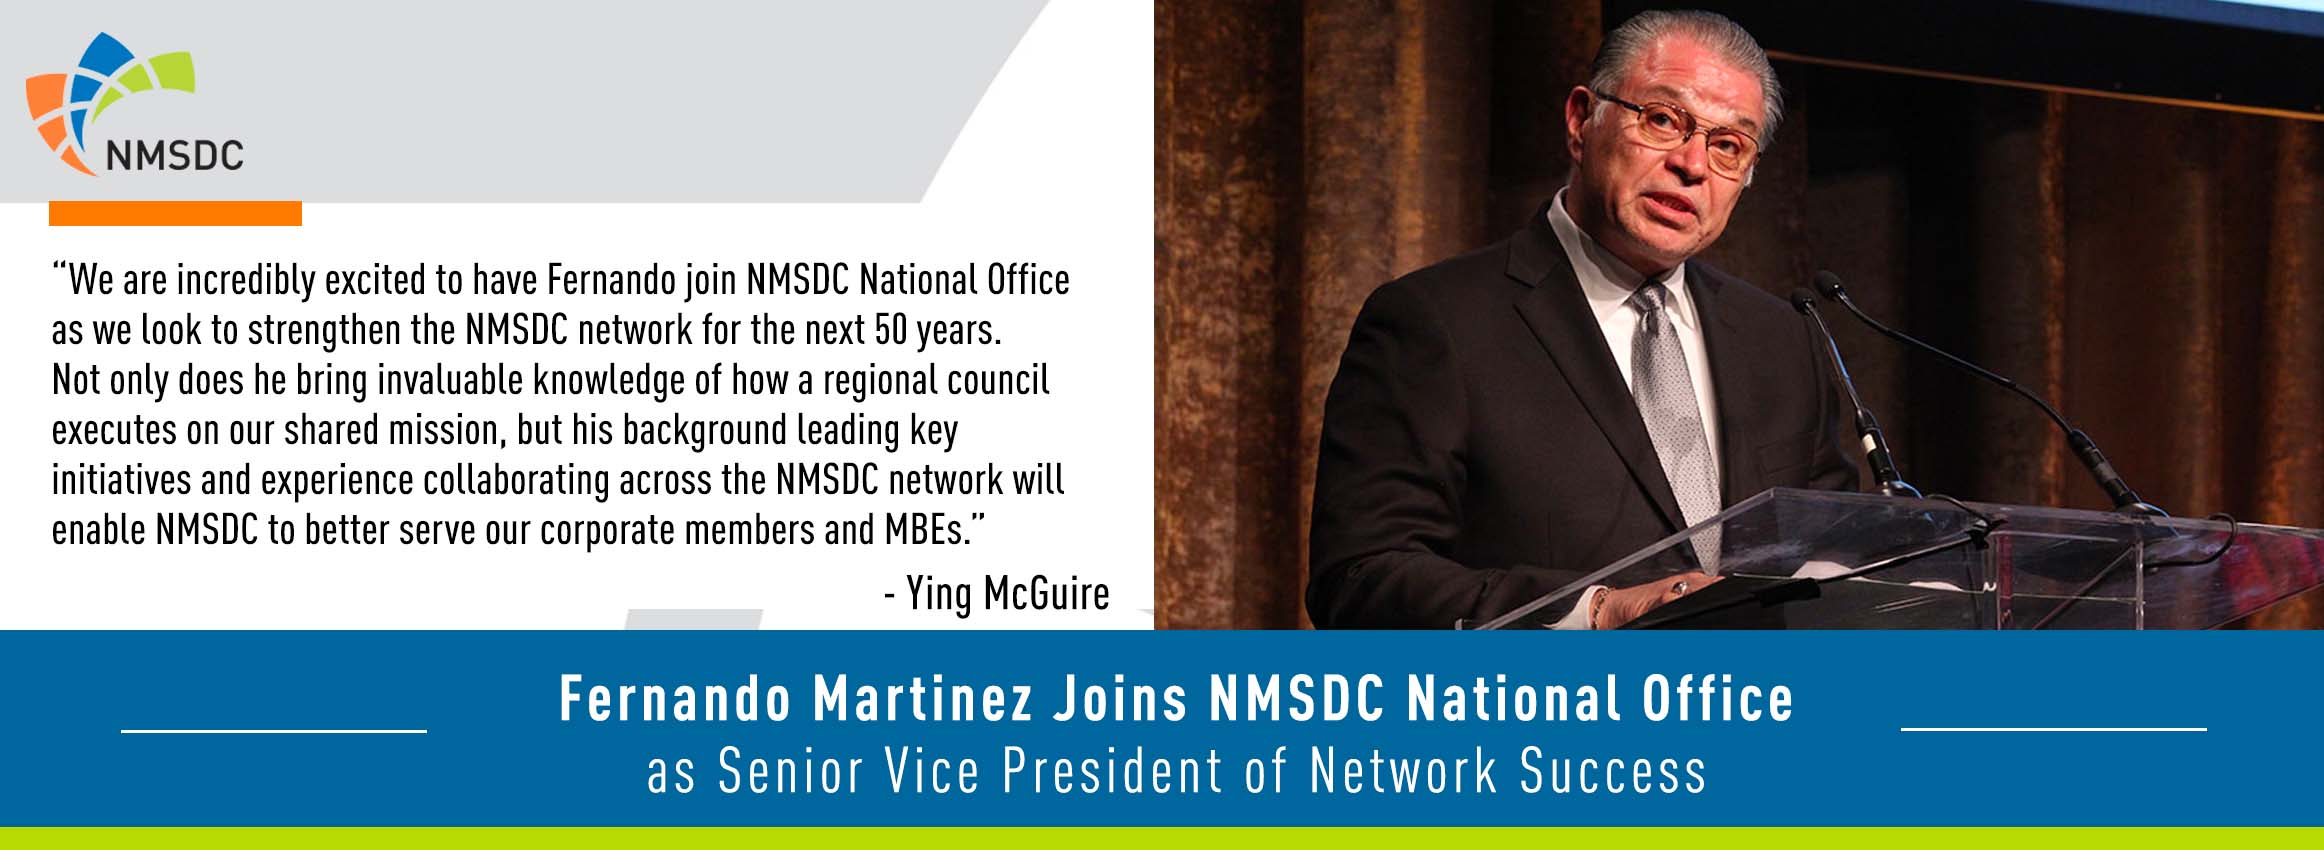 Fernando Martinez Joins NMSDC National Office as Senior Vice President of Network Success